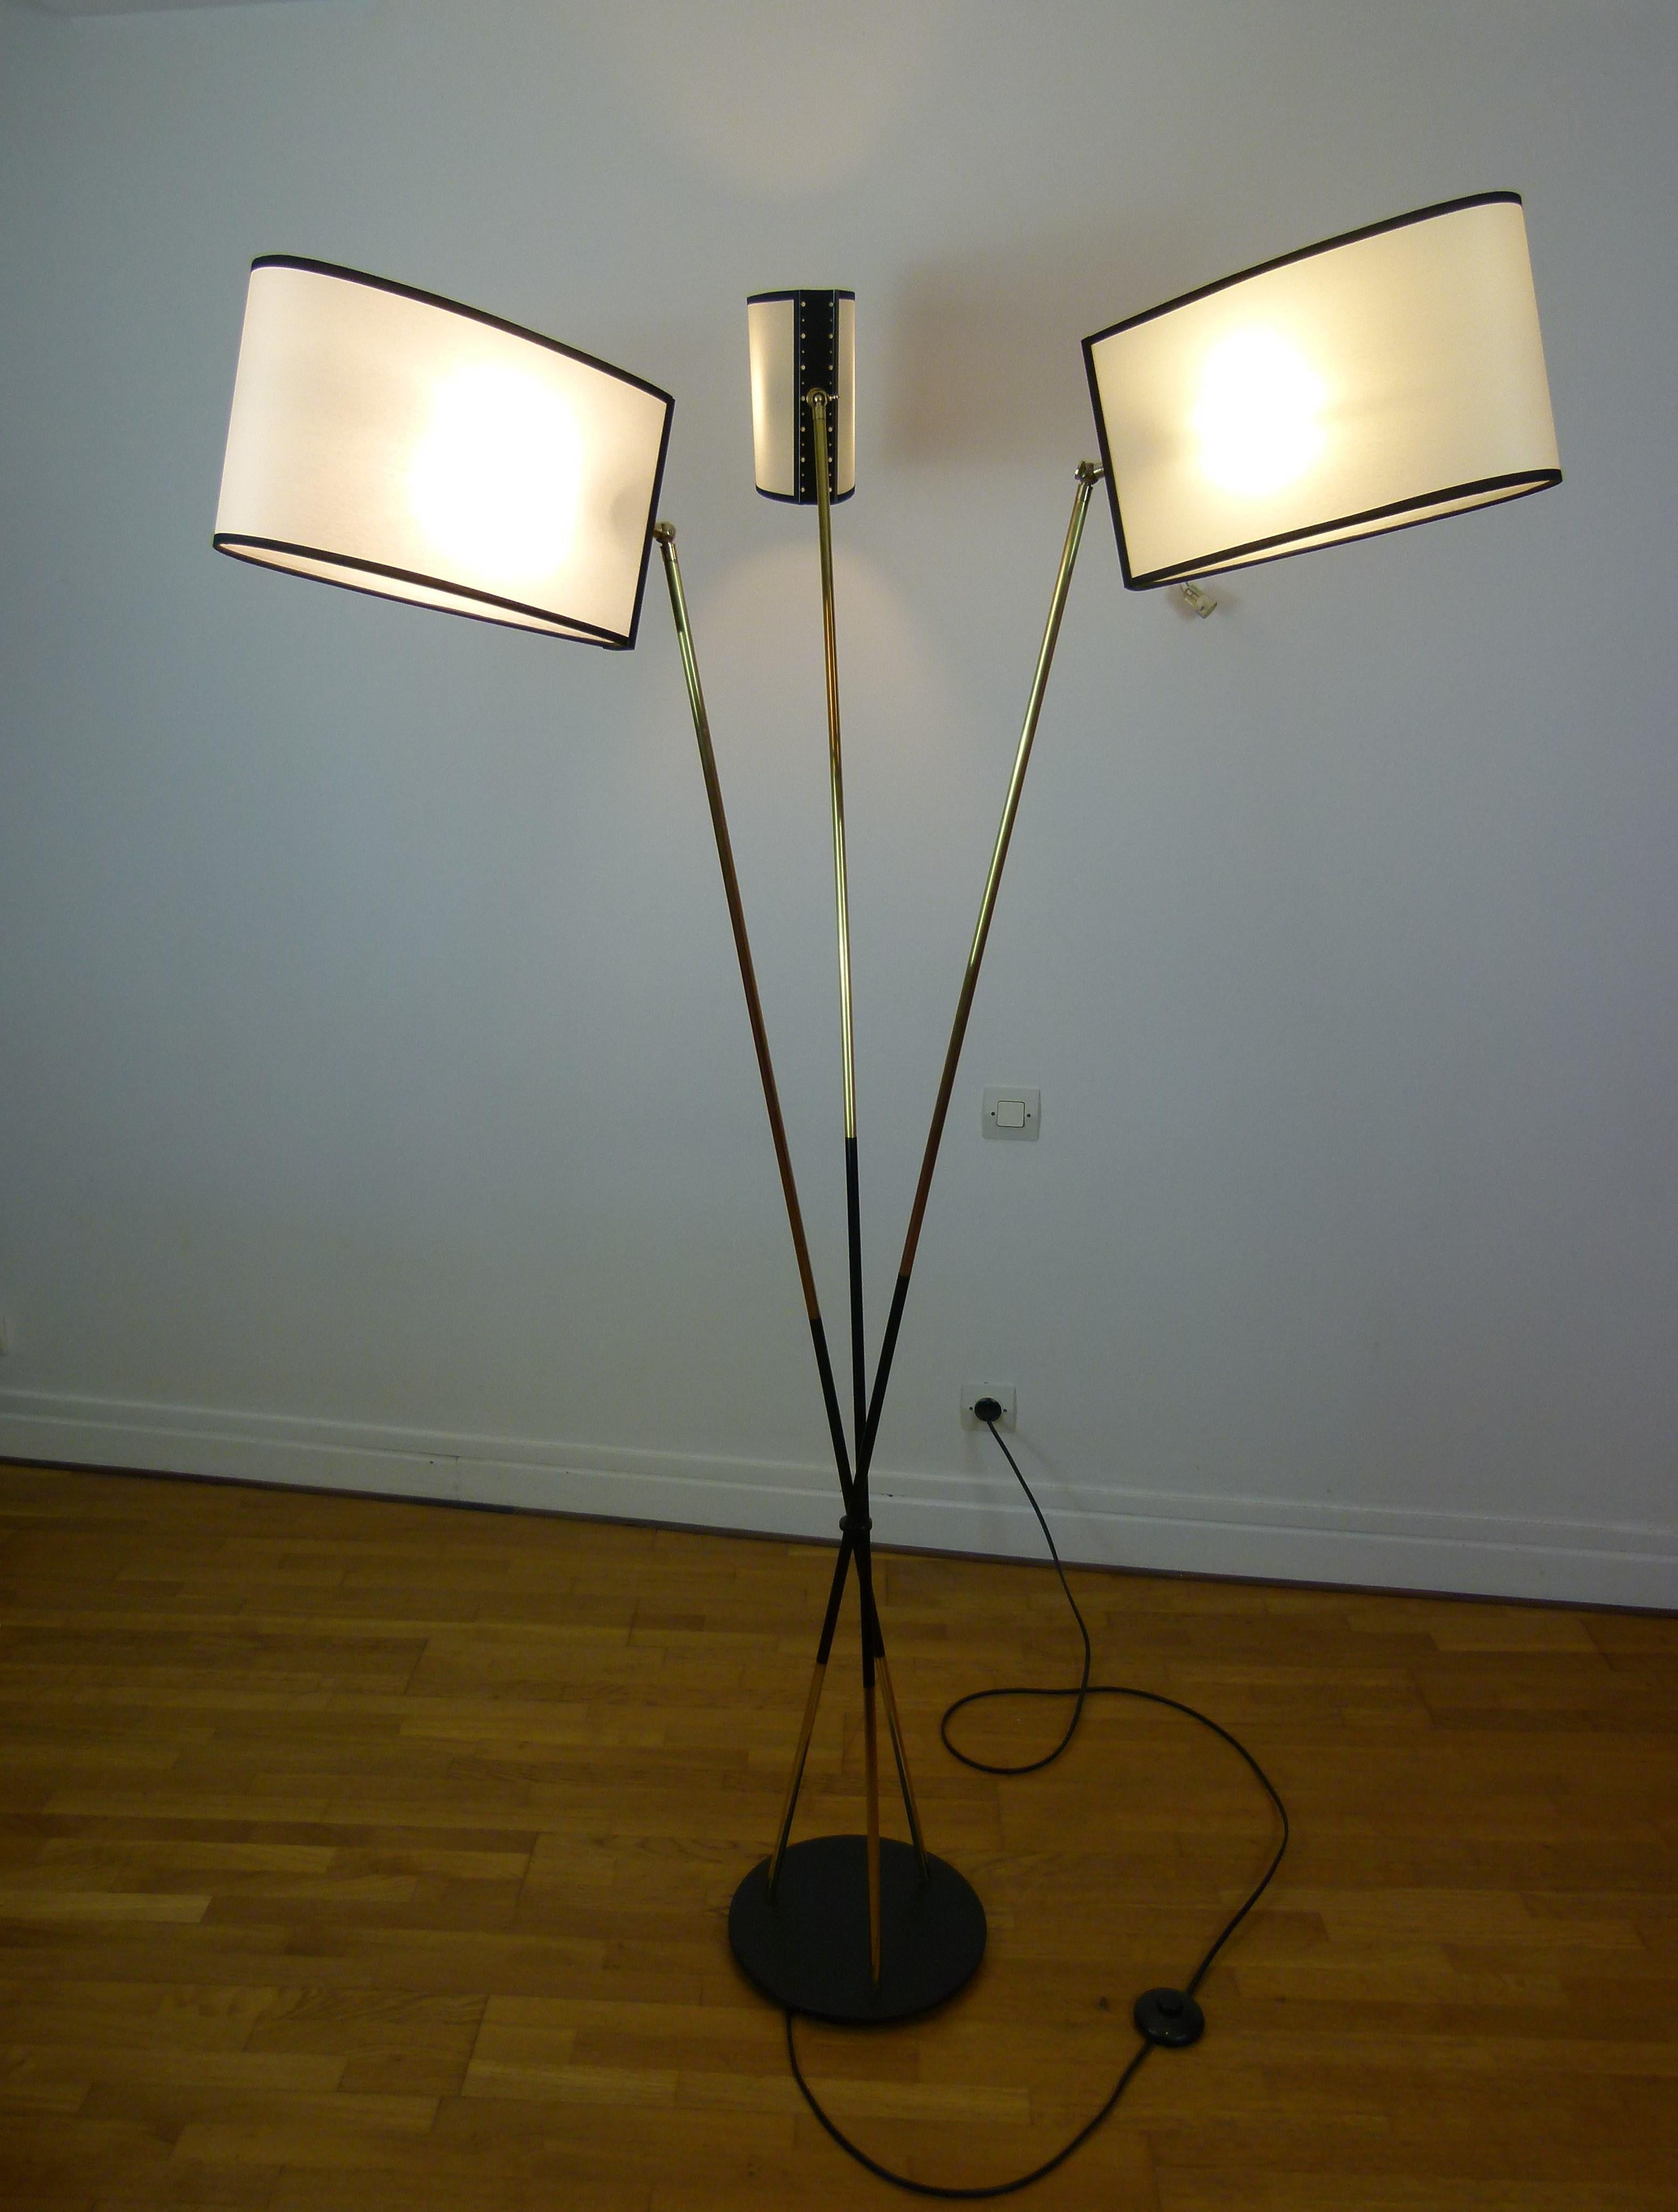 
Pair of floor lamps in brass and black lacquered metal.
composed of a circular base in black lacquered cast iron; on which are placed 3 brass light arms, crisscrossed in the middle.
Each arm has a brass ball joint, supporting an oval lampshade,